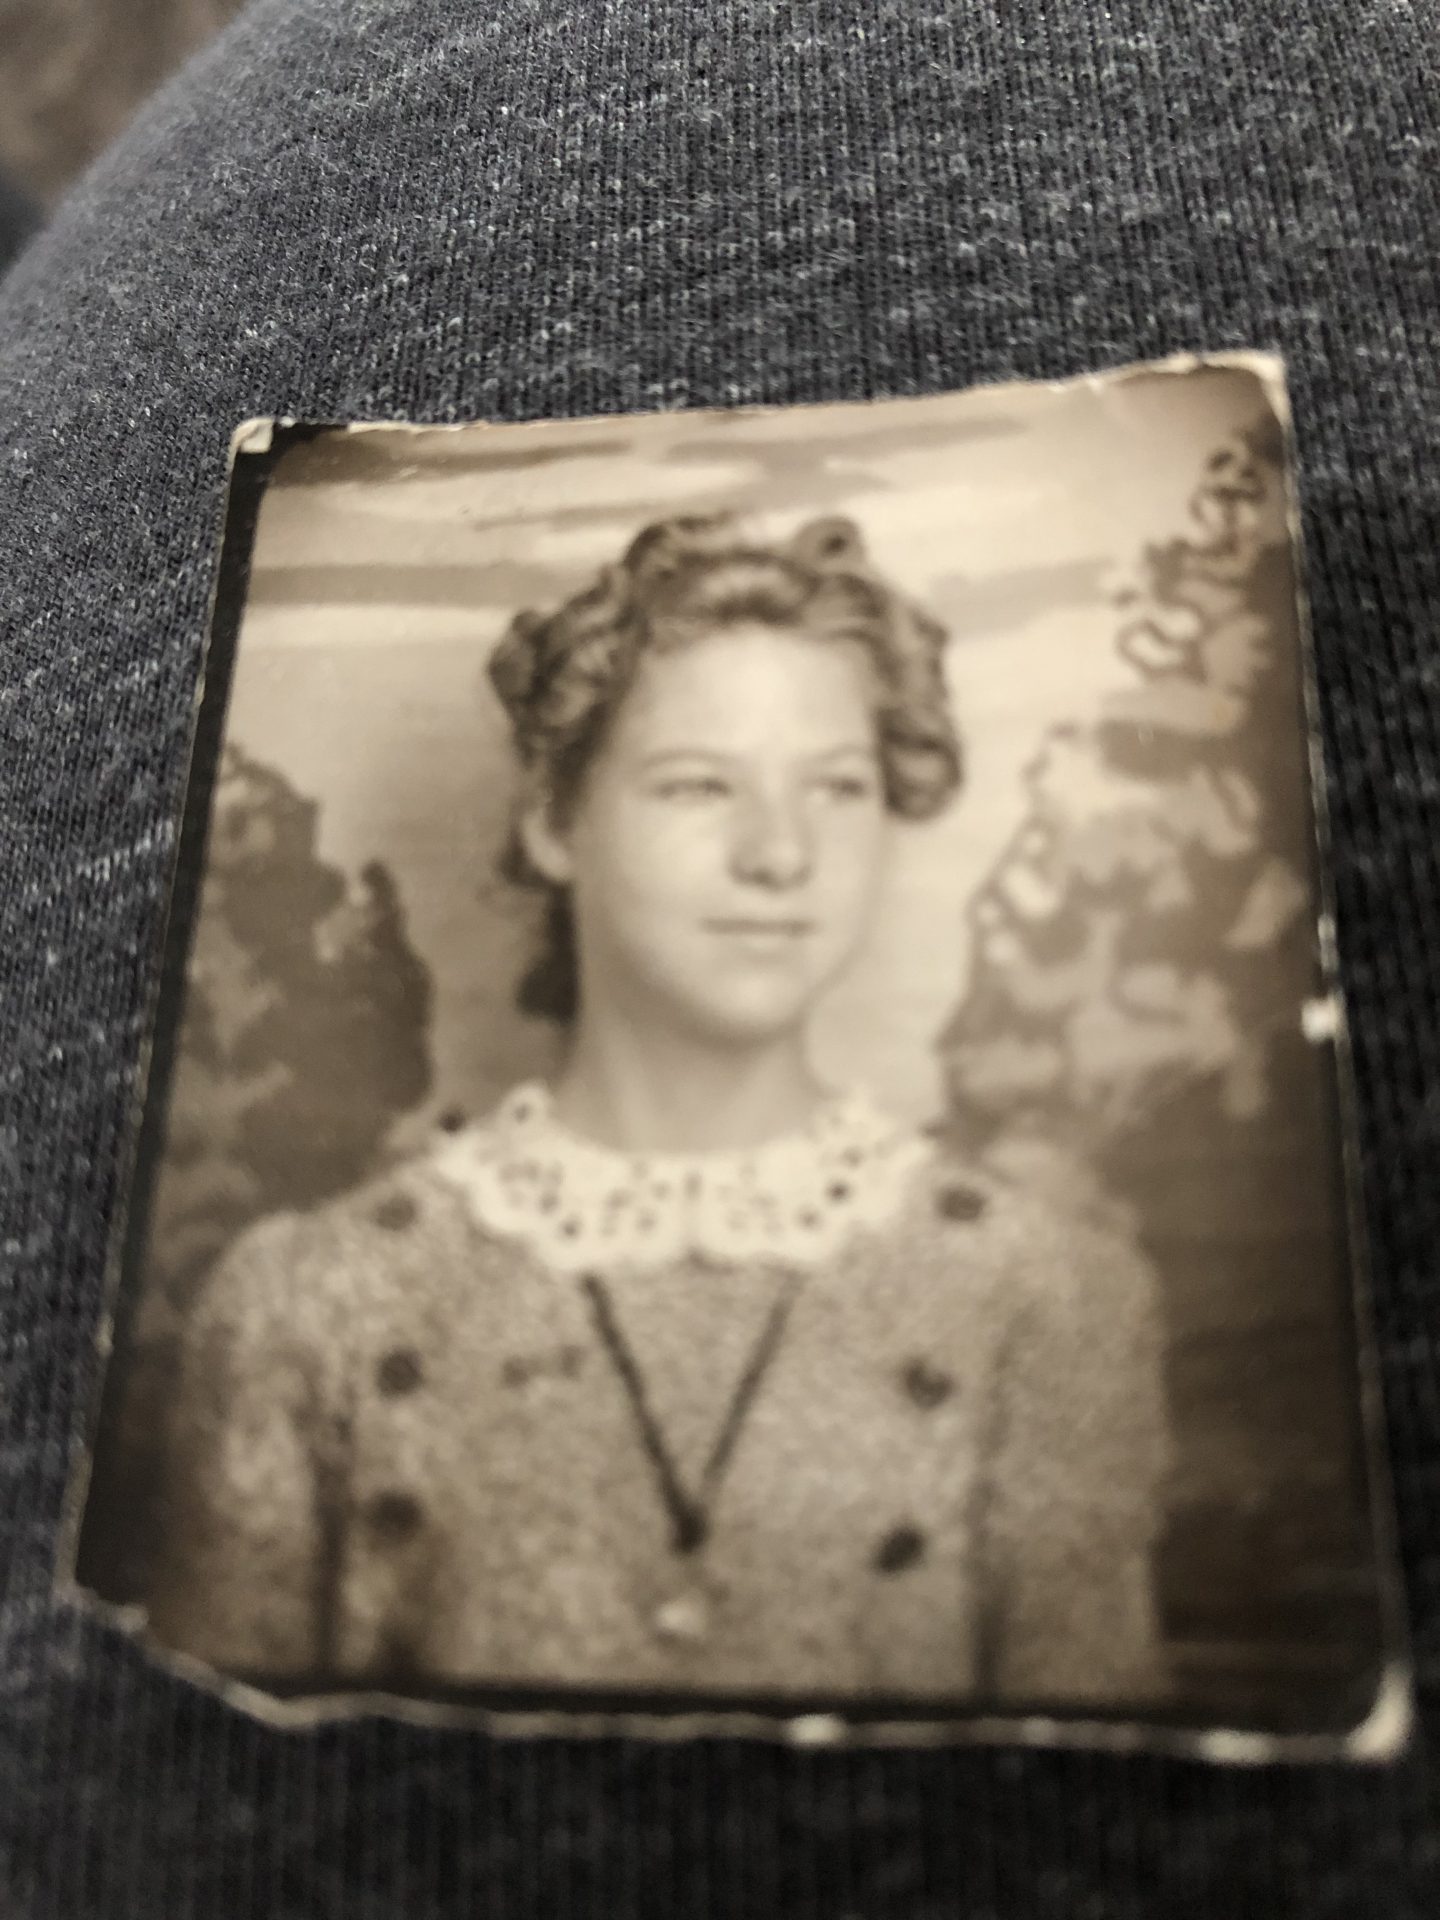 Mom in her Teens, her family called her LiL Queens, because she resembled a Queen in her French Lineage.